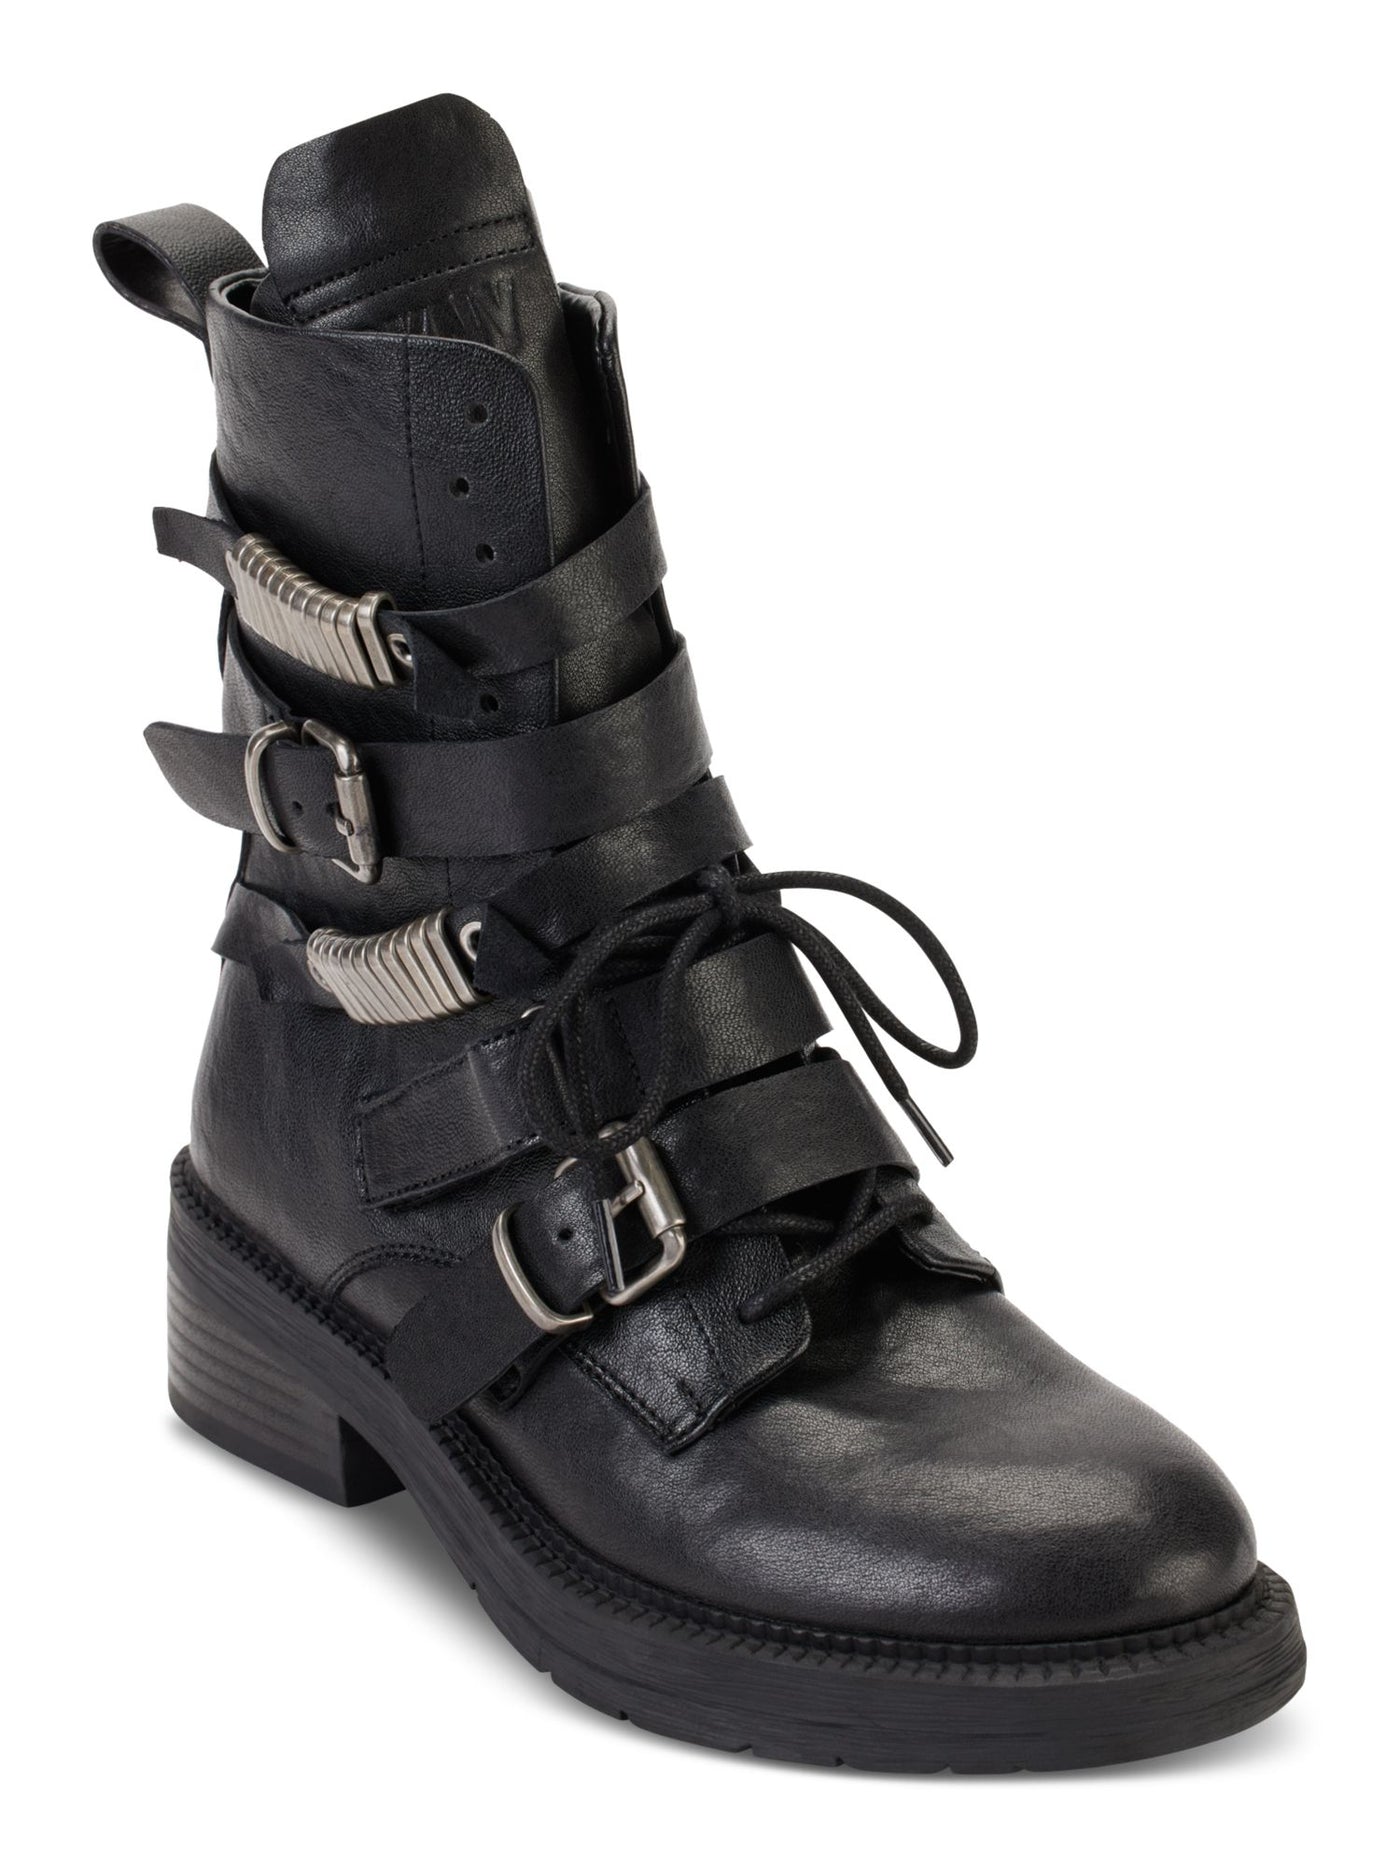 DKNY Womens Black Zipper Accent Ita Round Toe Block Heel Buckle Leather Boots Shoes 6 M